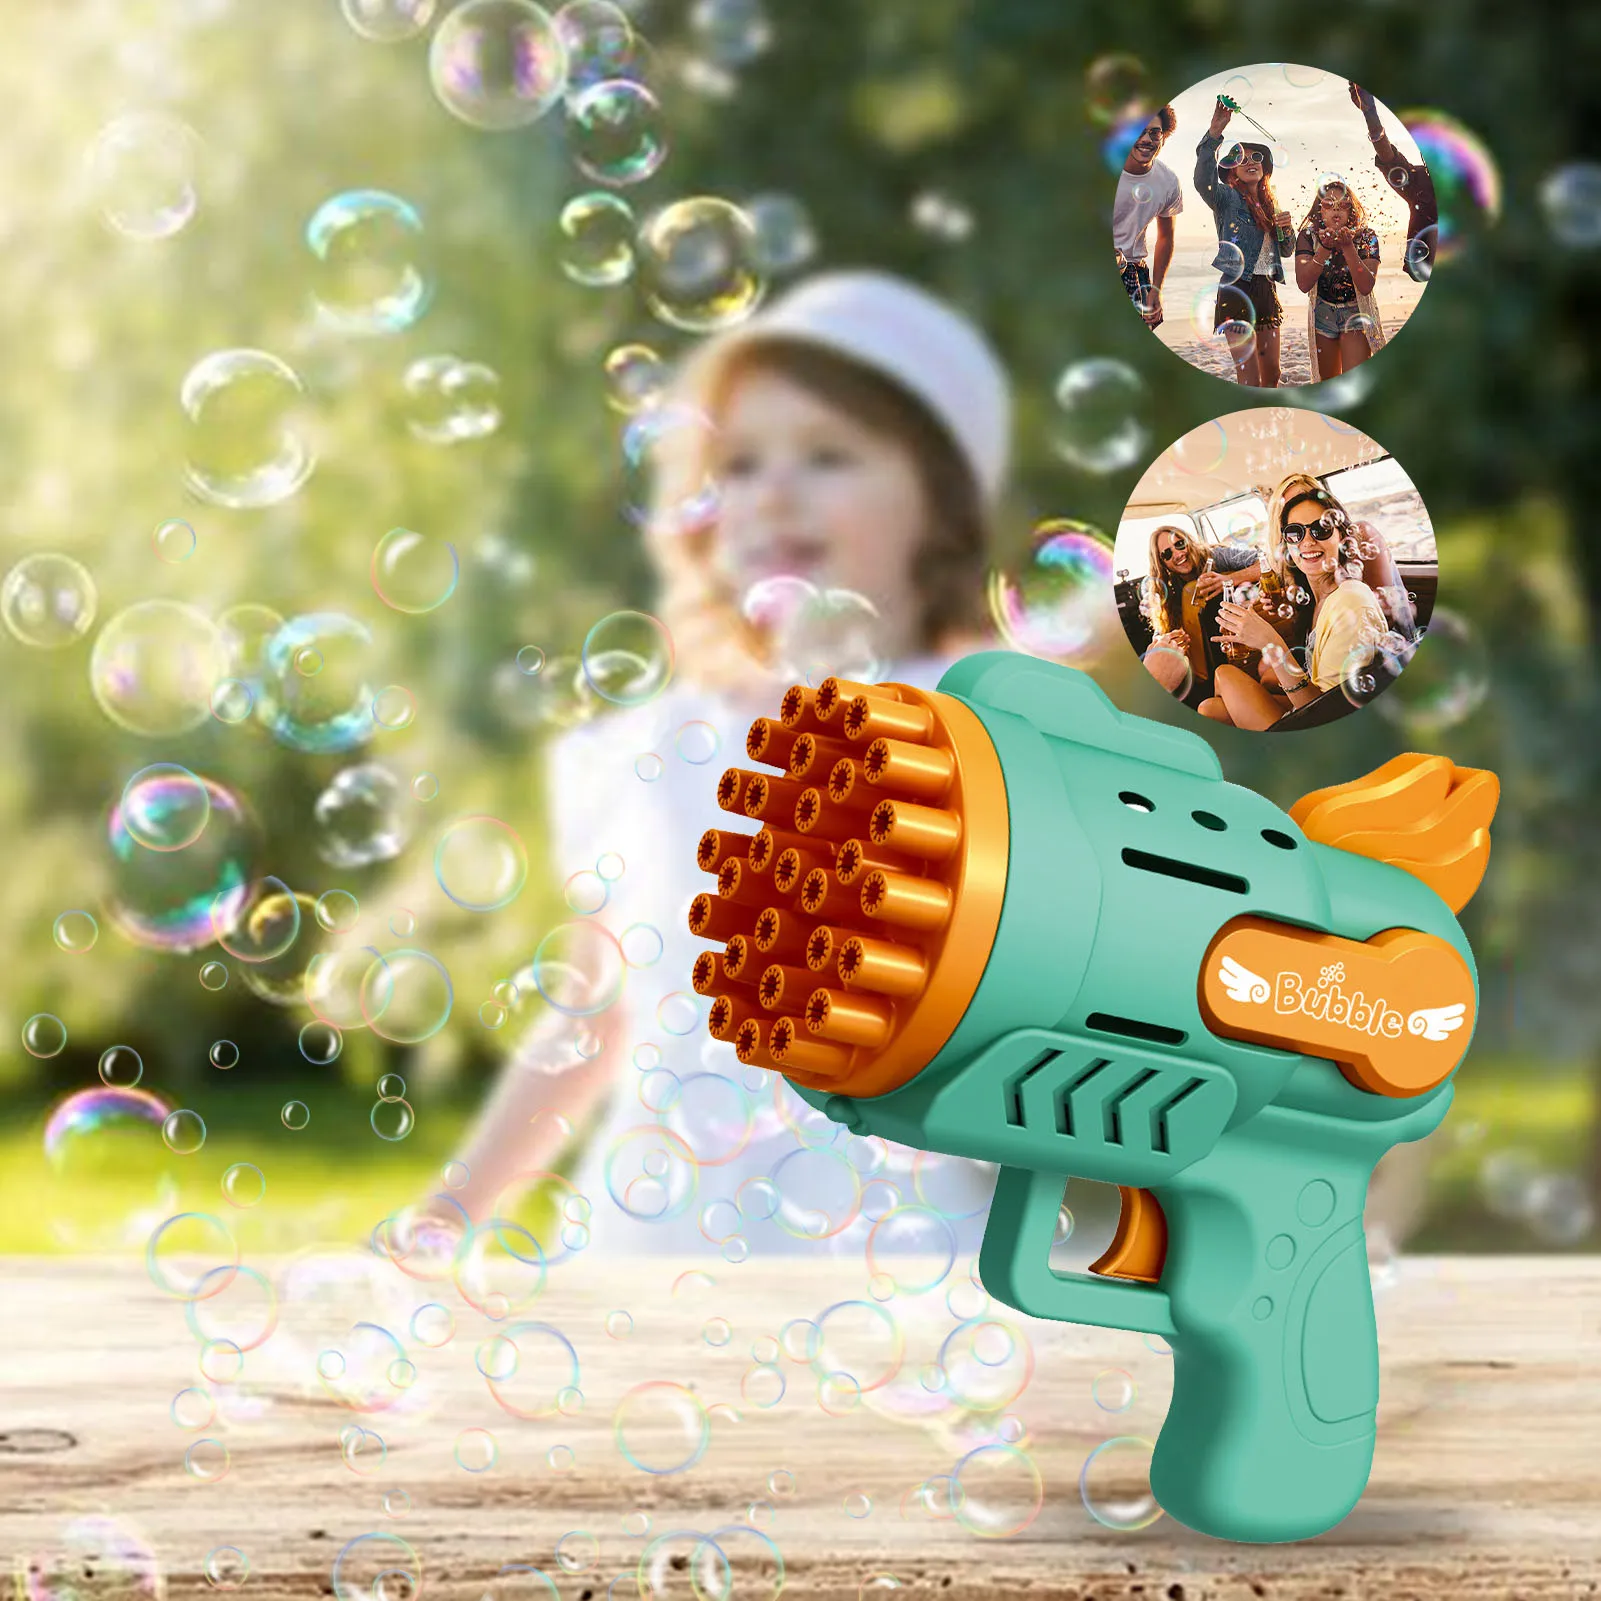 Bubble Gun Rocket 29 Hole Automatic Soap Bubbles Machine Outdoor Toy for Boys Birthday Gifts Wedding Party Children Summer Gift soap bubble machine blowing bubble plate navy blue soap for children gift big dish bubble set blower maker bubble outdoor toys